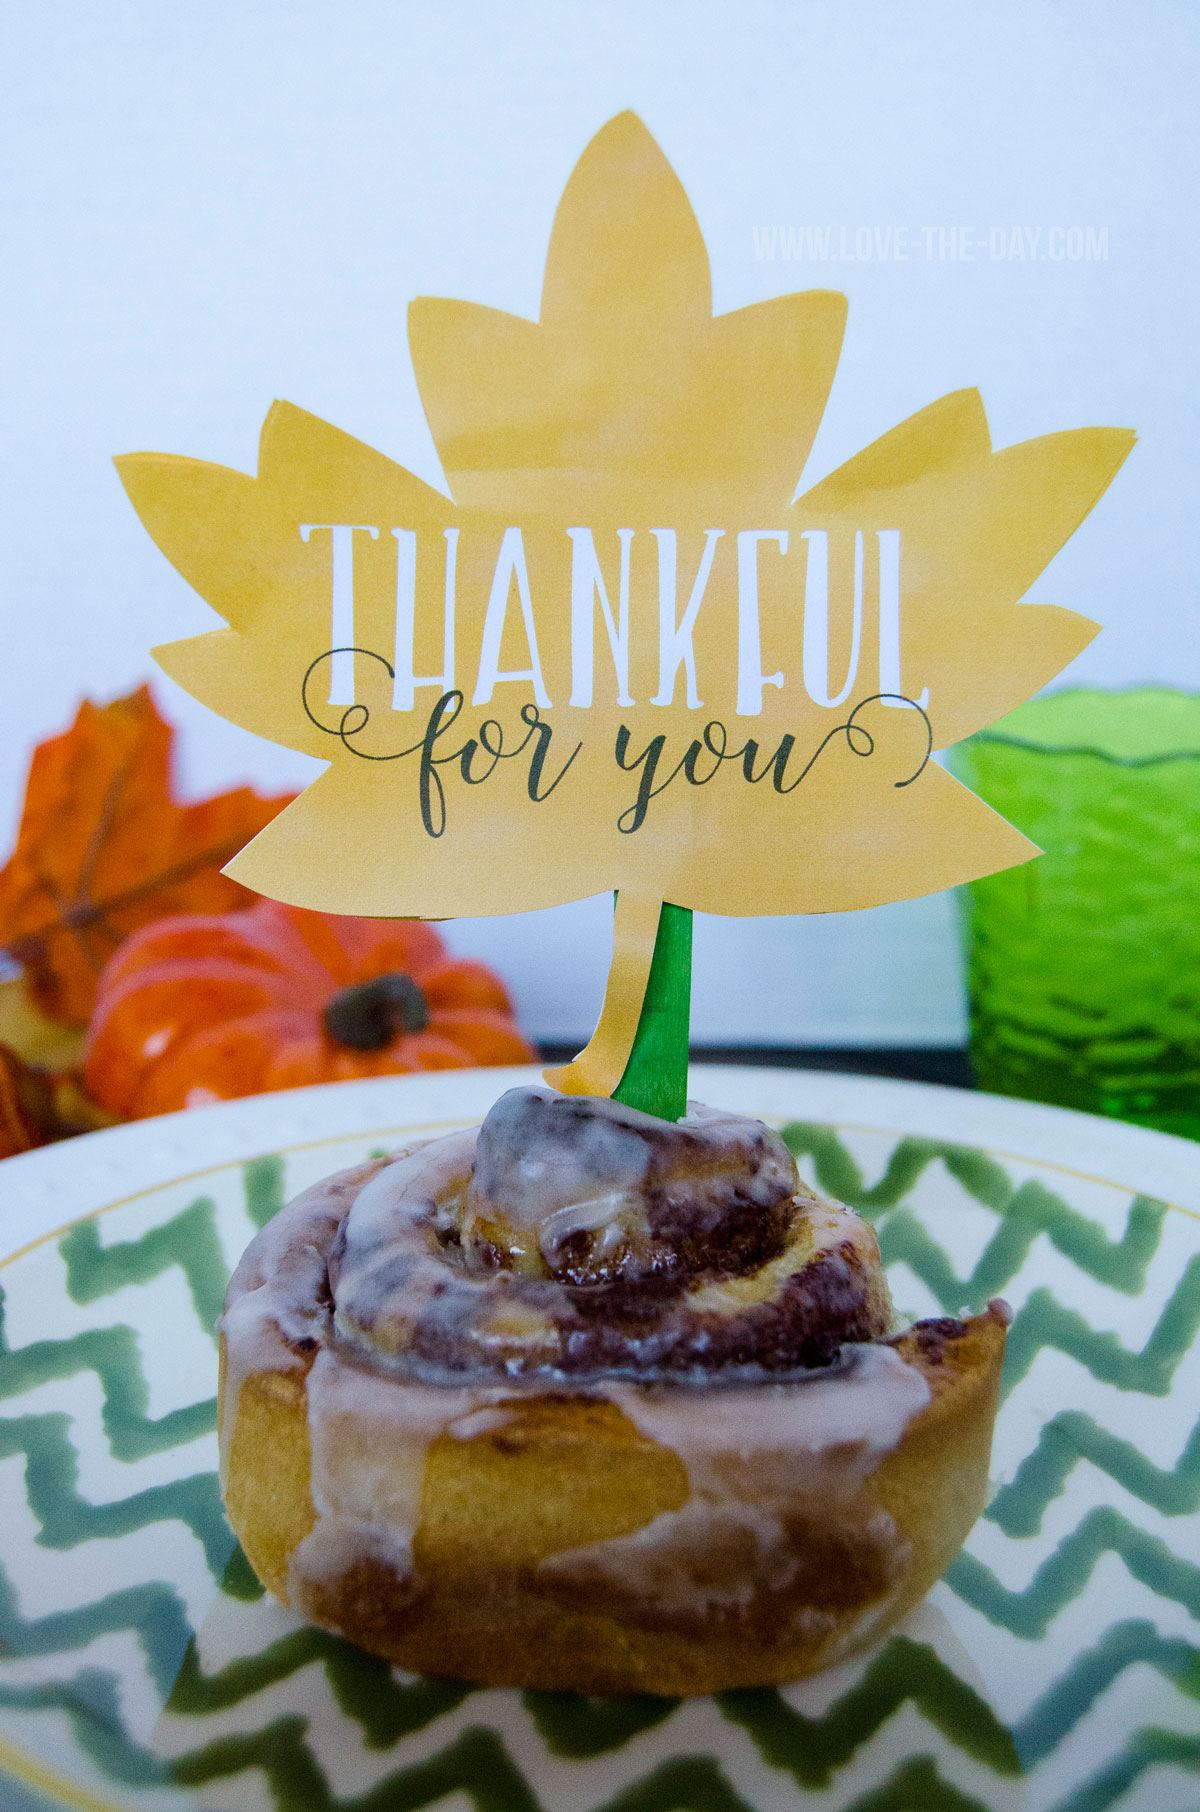 FREE ?Thankful For You? Leaf Printable by Love The Day